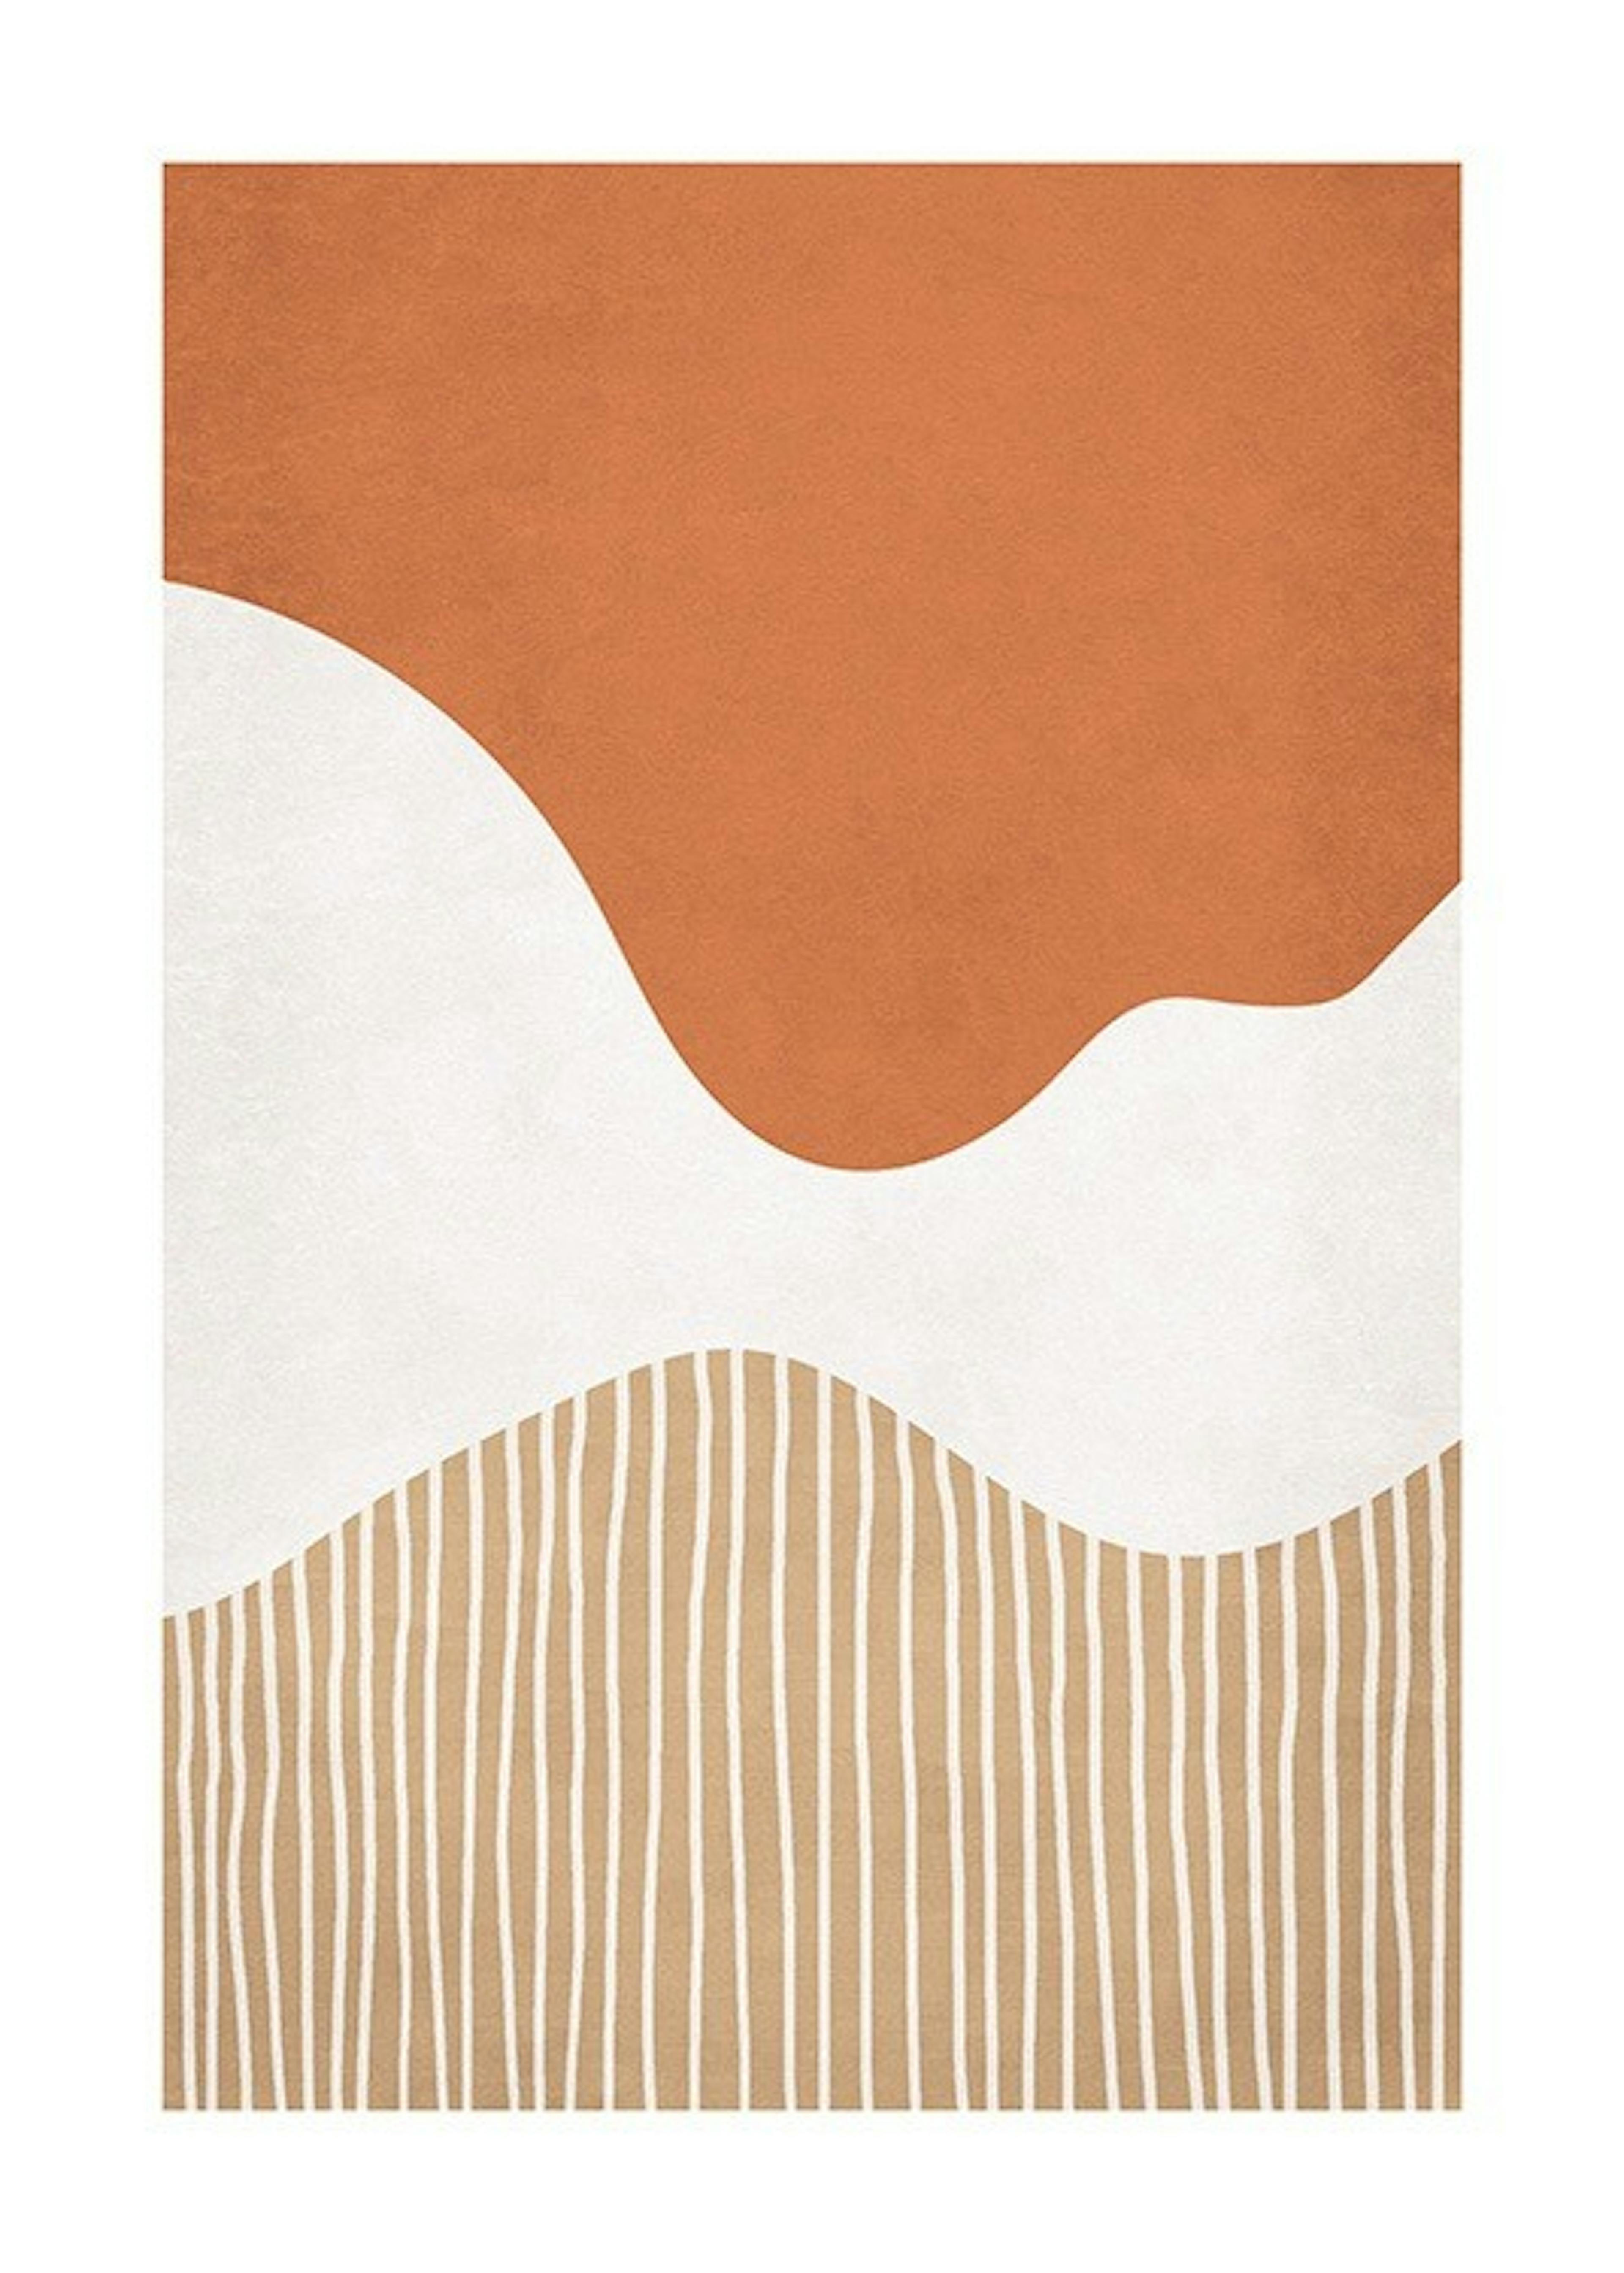 Abstract Shapes and Lines Print 0